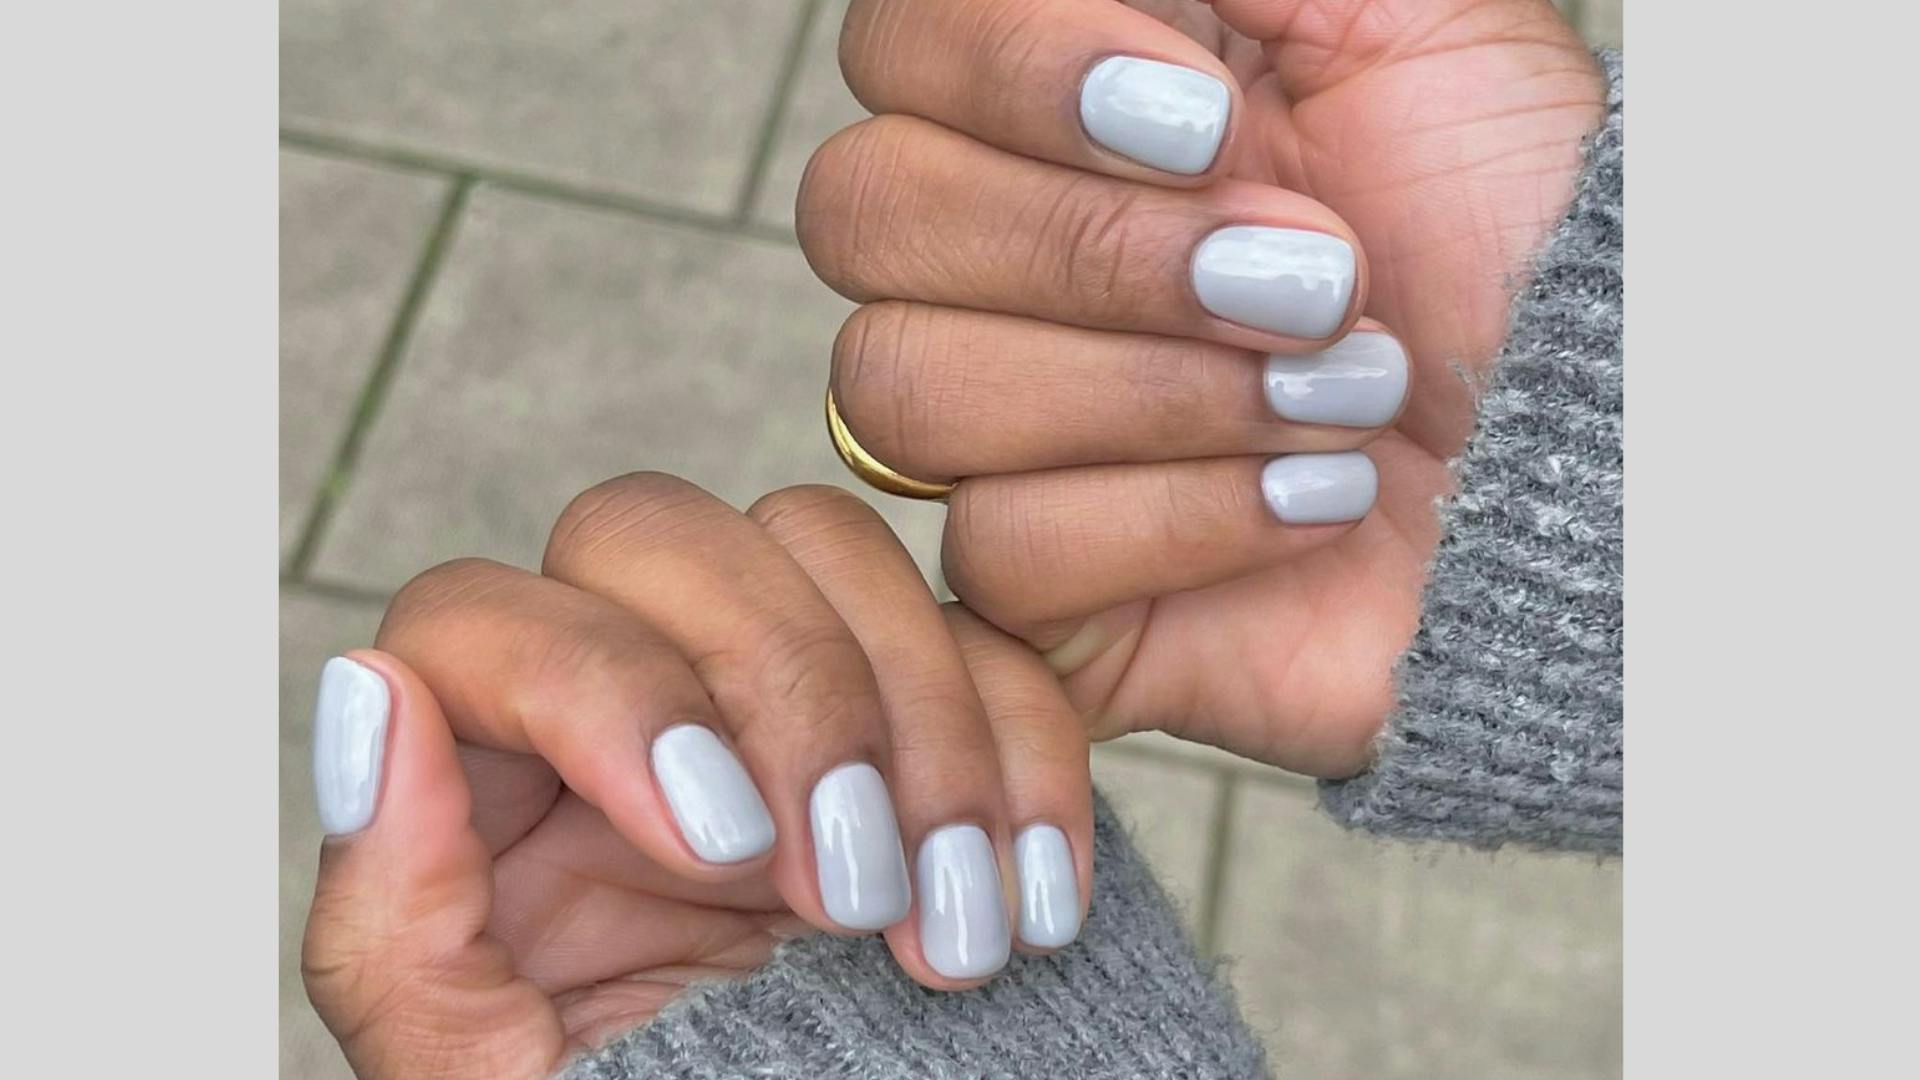 20 October Nail Ideas for a Moody, Autumnal Manicure